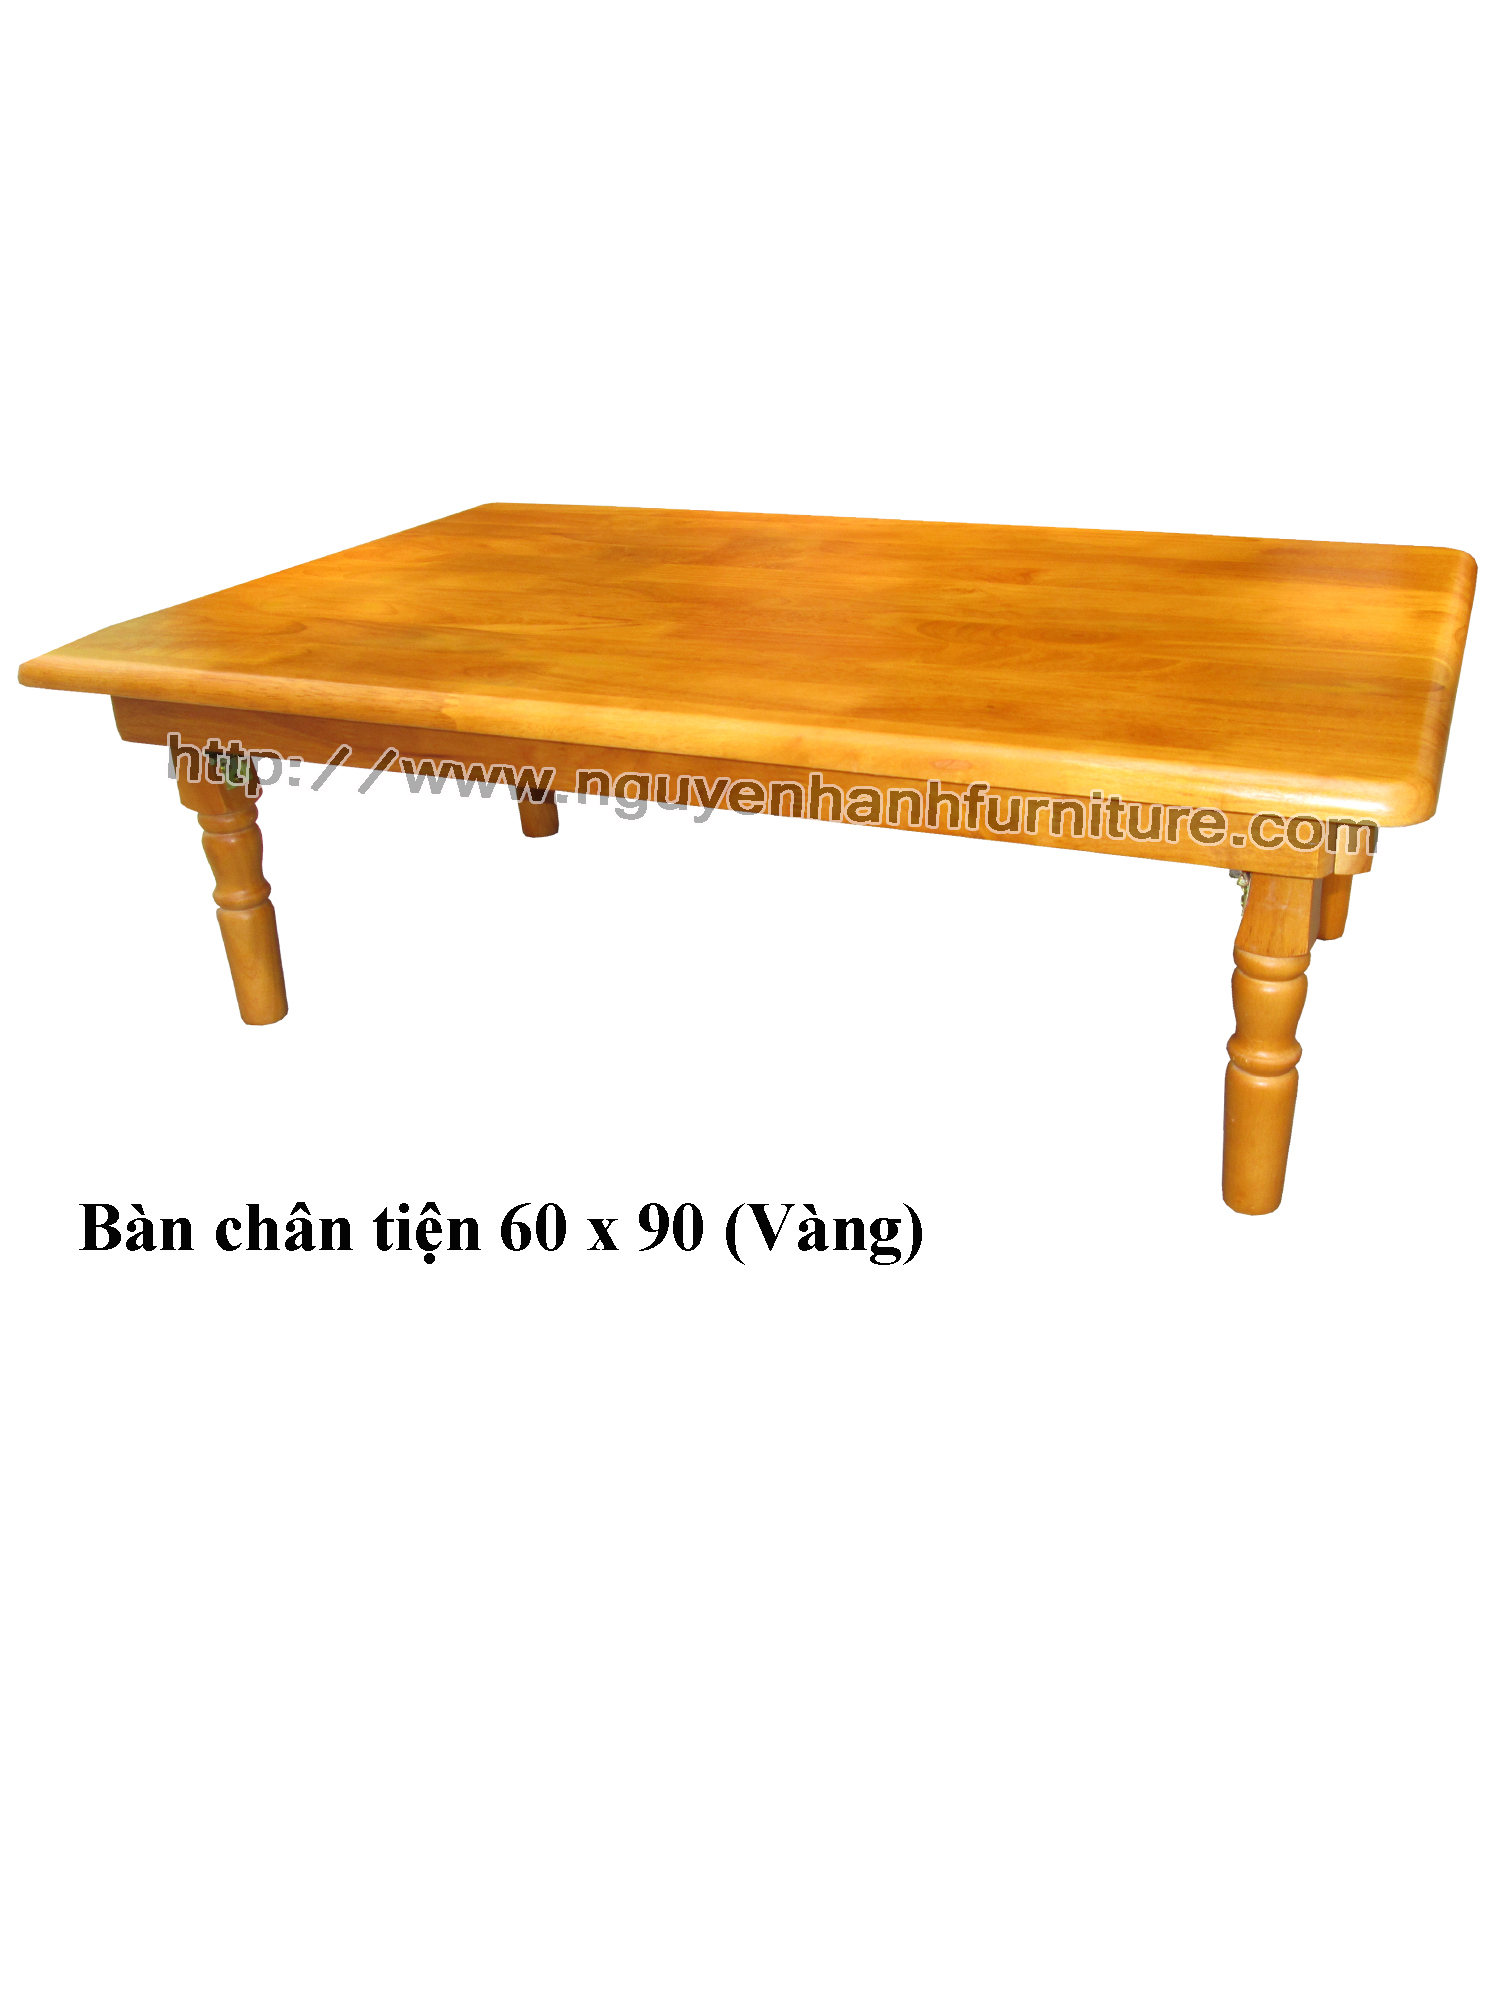 Name product: 6 x 9 Tea Table with turnery legs (Yellow) - Dimensions: 60 x 90c x 30 (H) - Description: Wood natural rubber